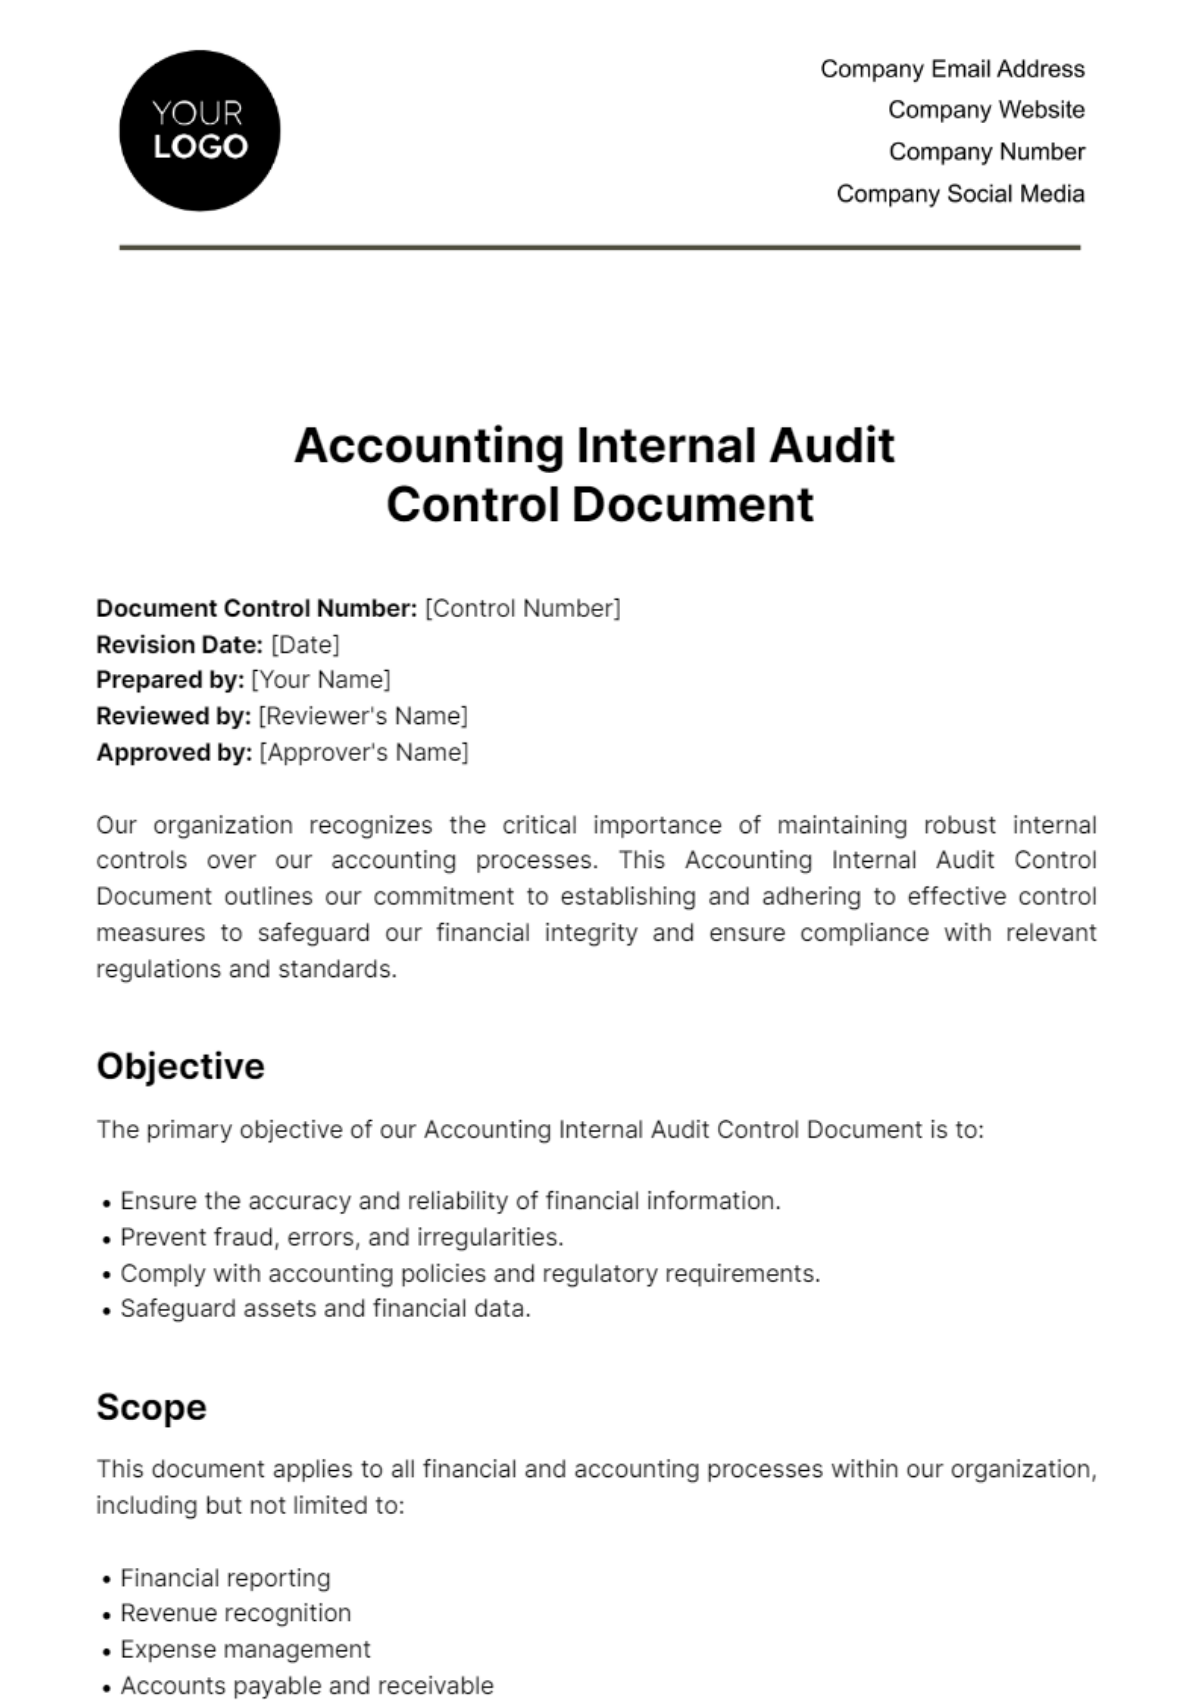 Free Accounting Internal Audit Control Document Template